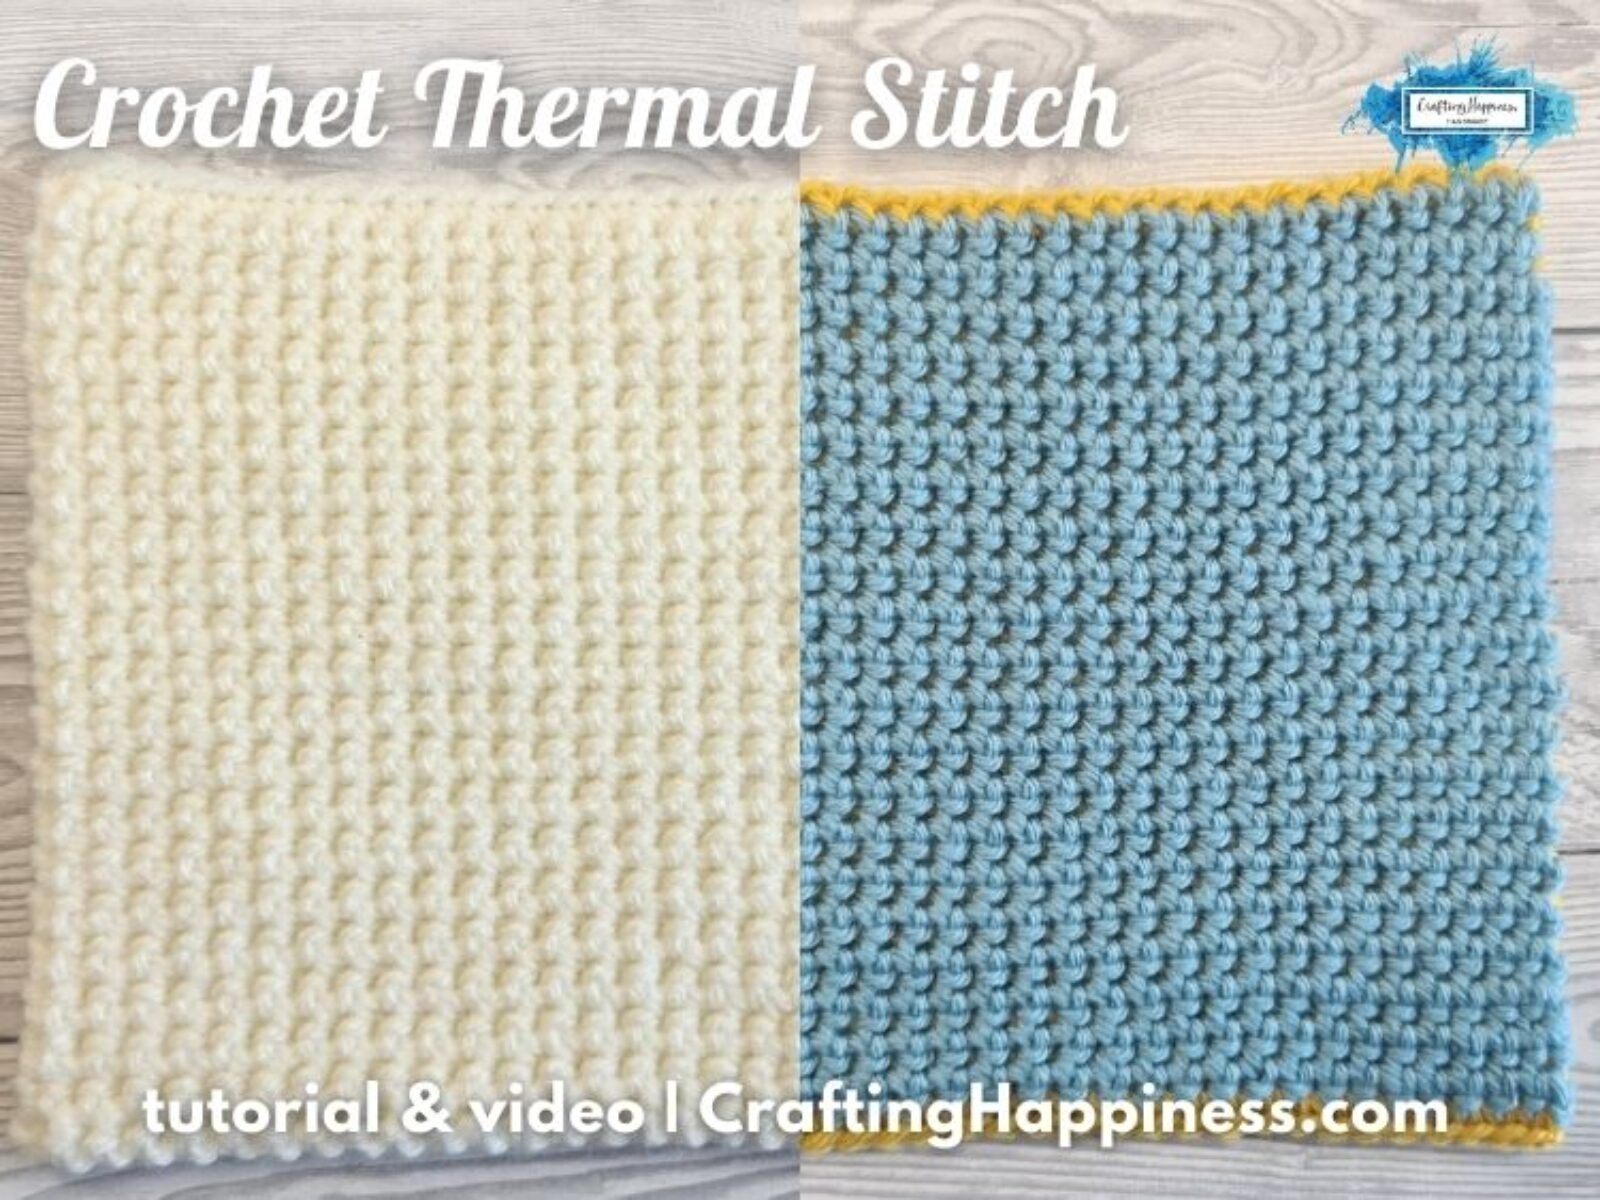 FB BLOG POSTER - Crochet Thermal Stitch Crafting Happiness